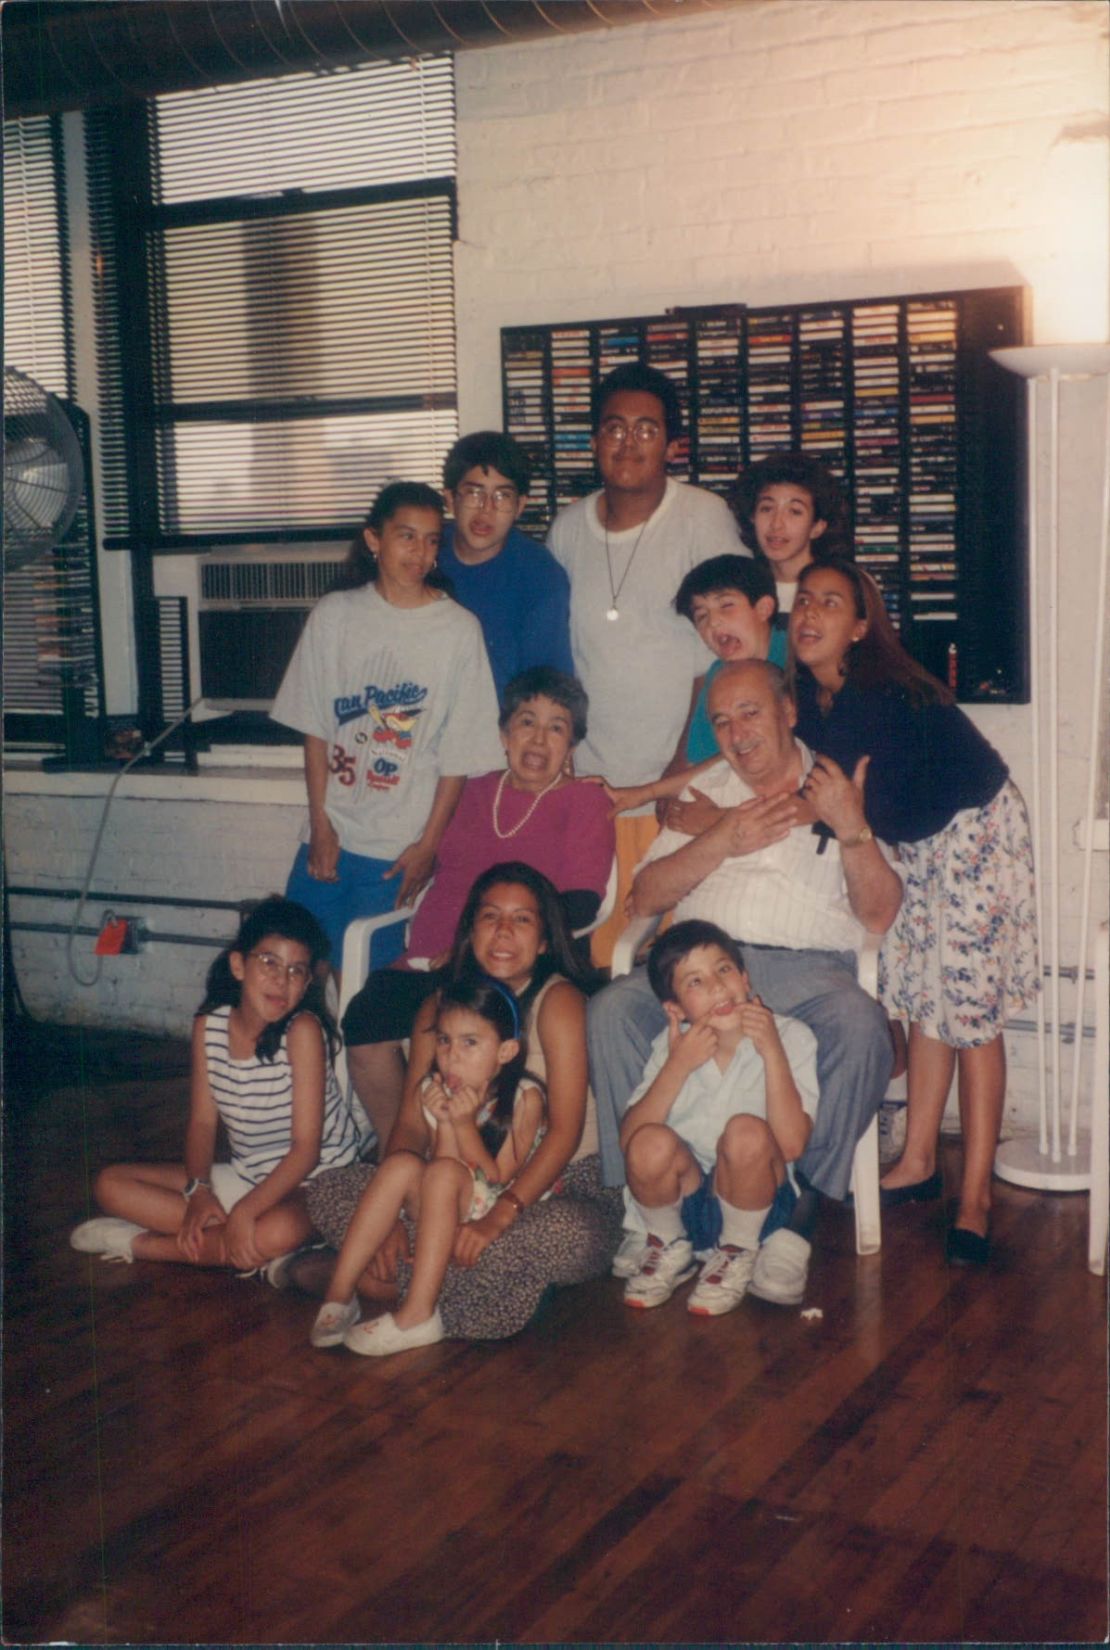 Doyle's parents, circa 1996, with some of their grandchildren.